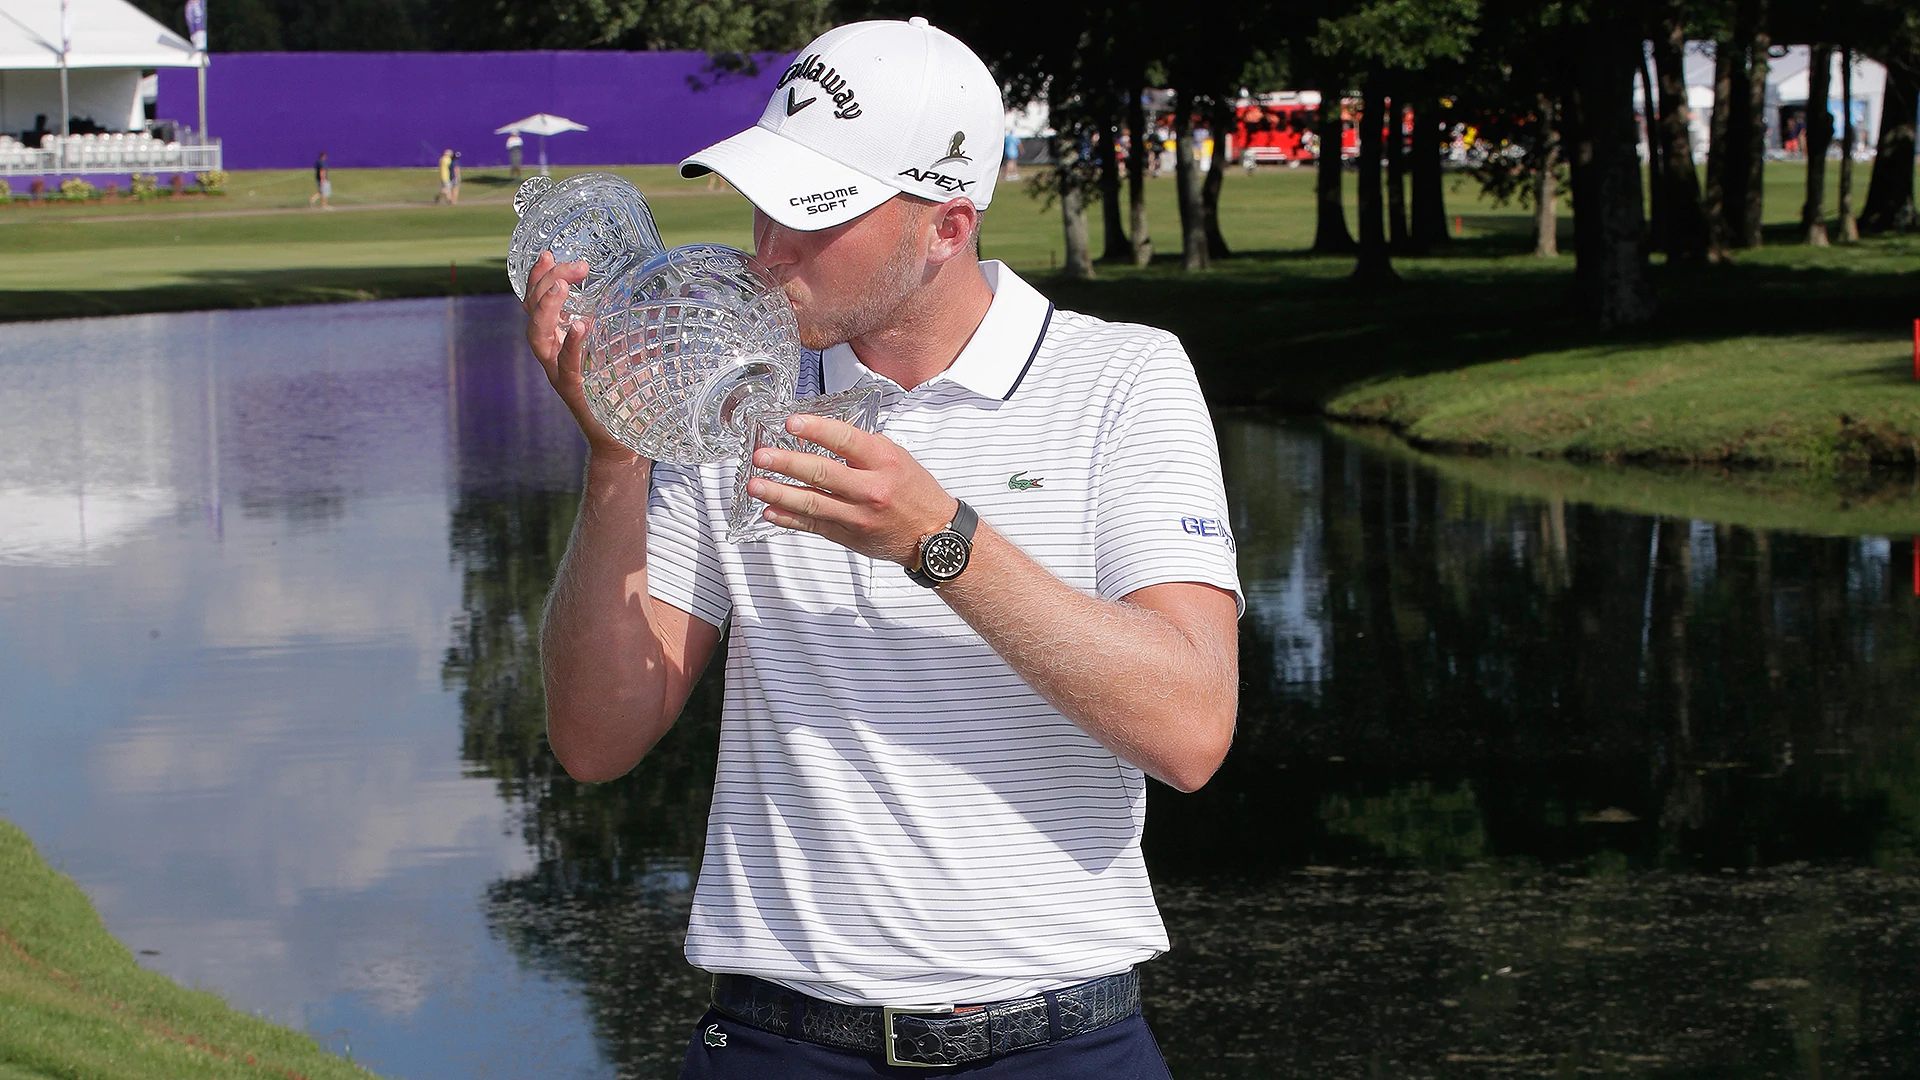 Berger repeats as FedEx St. Jude champ